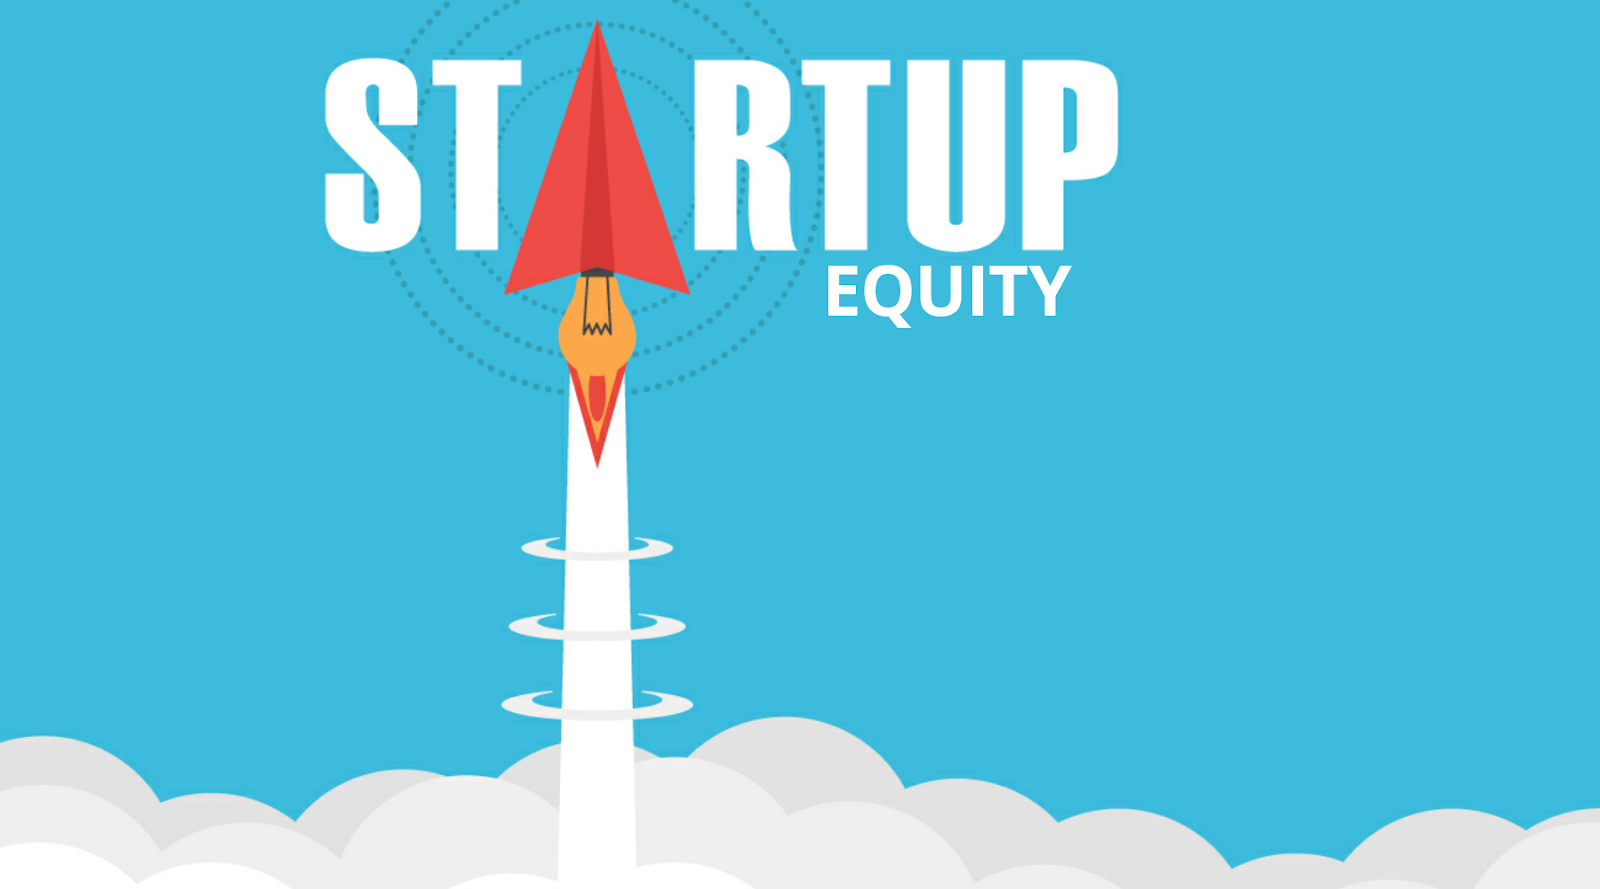 Start-up equity – Types and Tools for Calculations